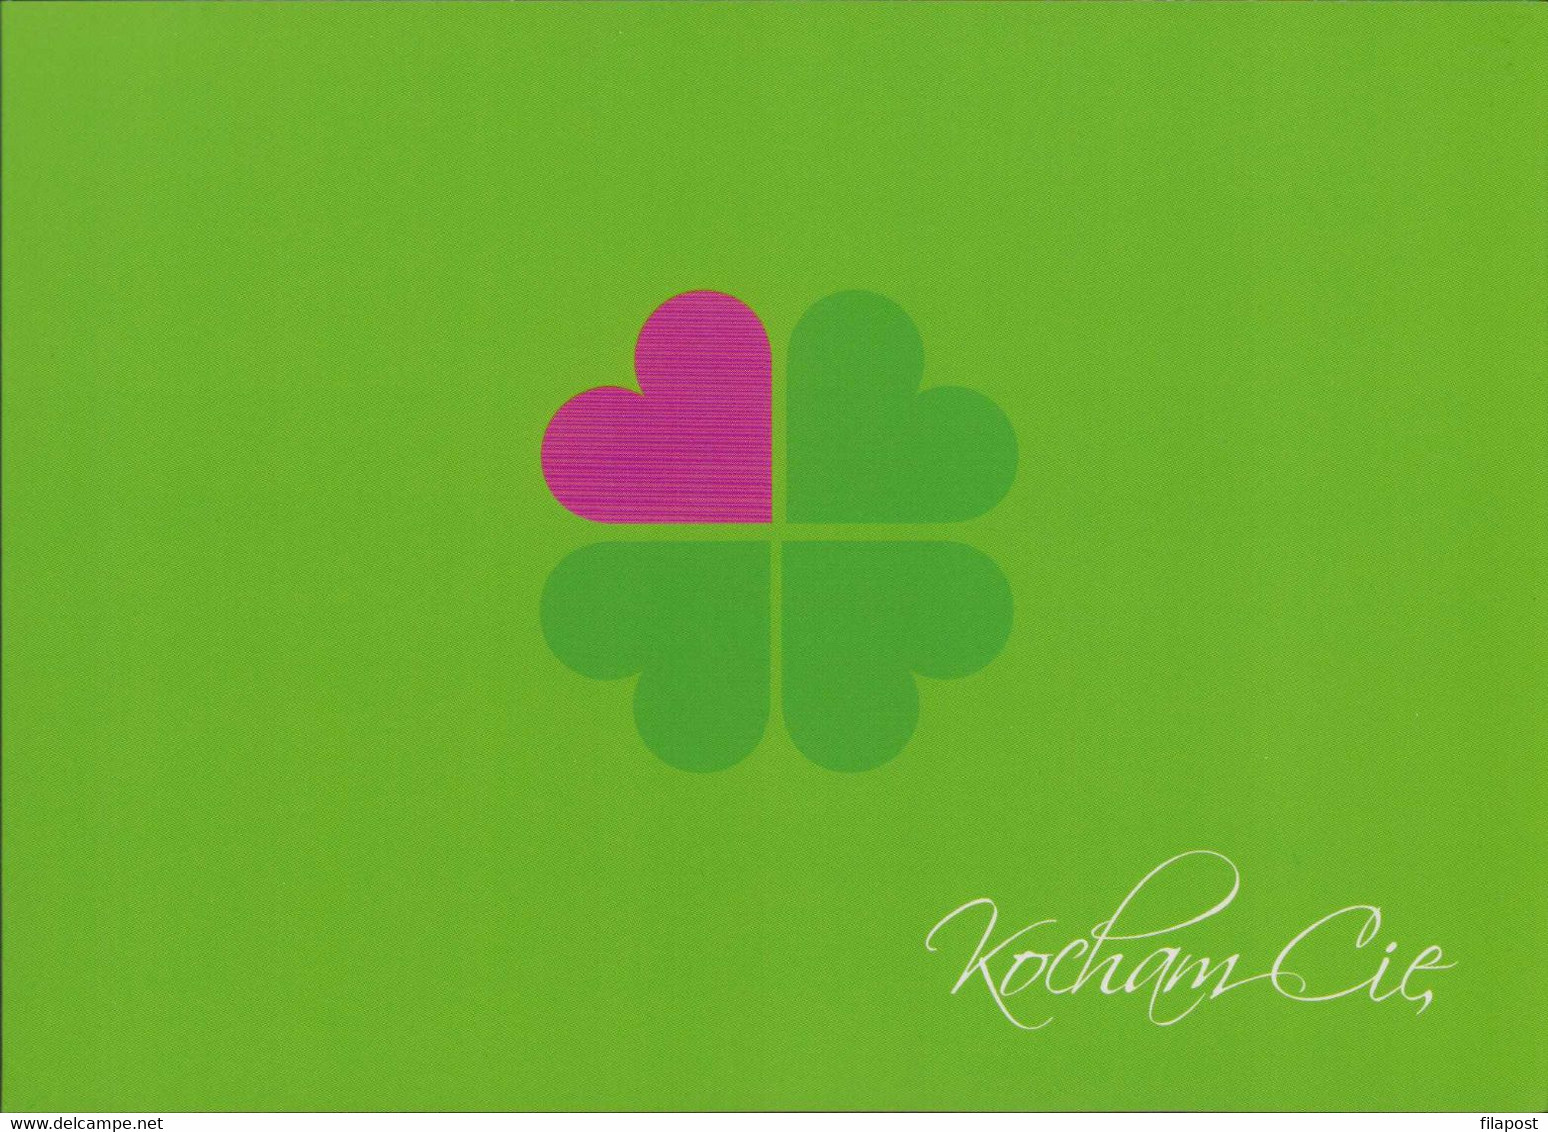 Poland 2009 Souvenir Mini Booklet / Valentines Day, Celebration, Love, Four-leaf Clover, Happiness / FDC + Stamp MNH**FV - Cuadernillos